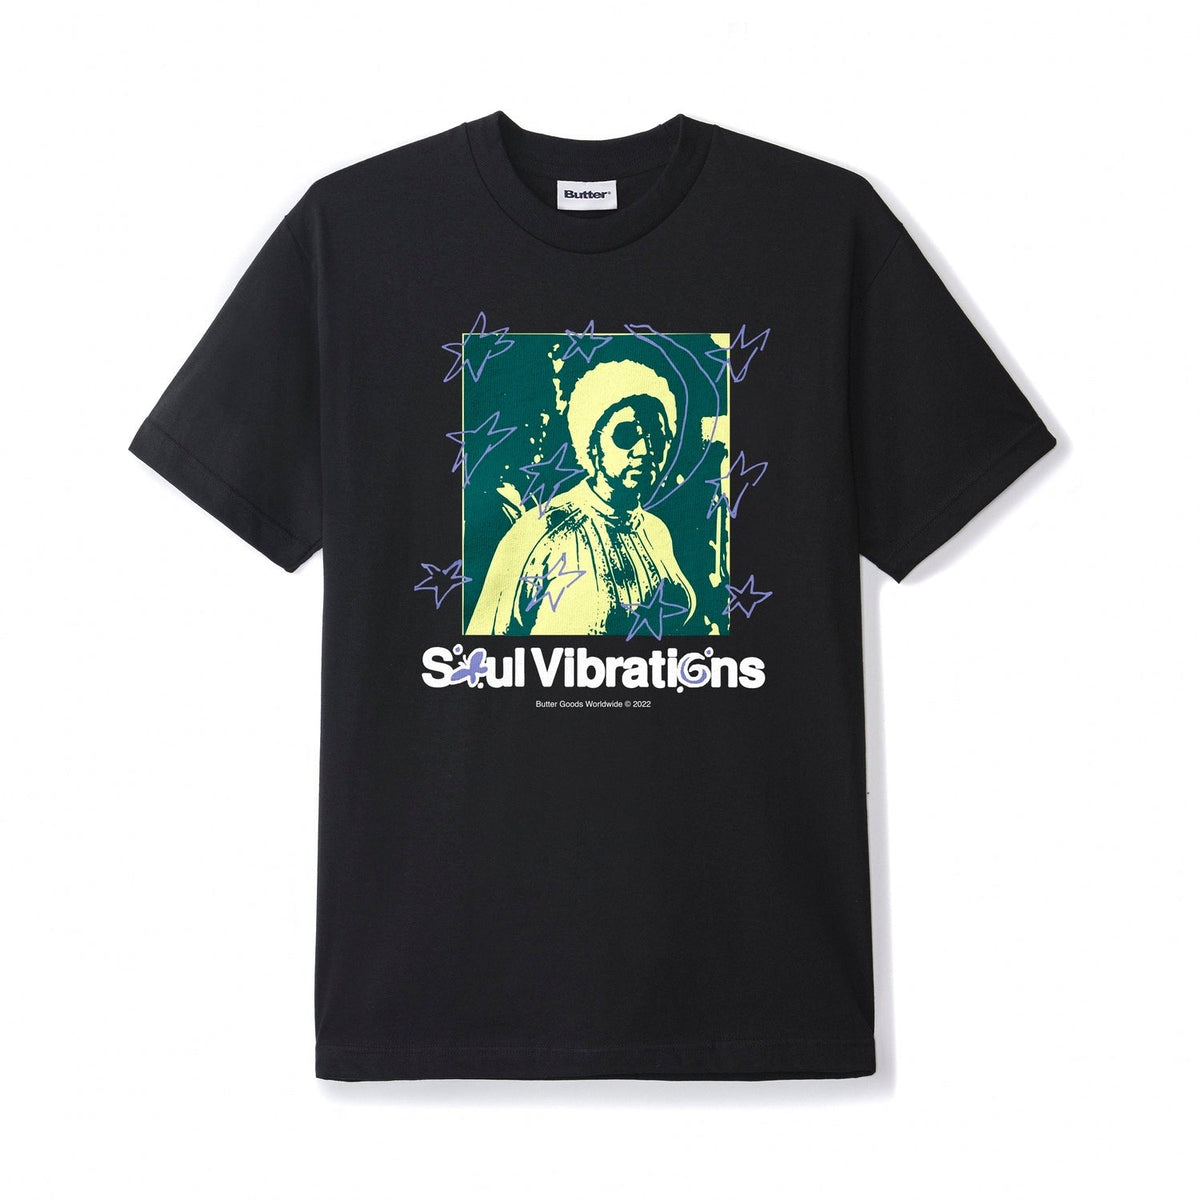 Butter Soul Vibrations Tee